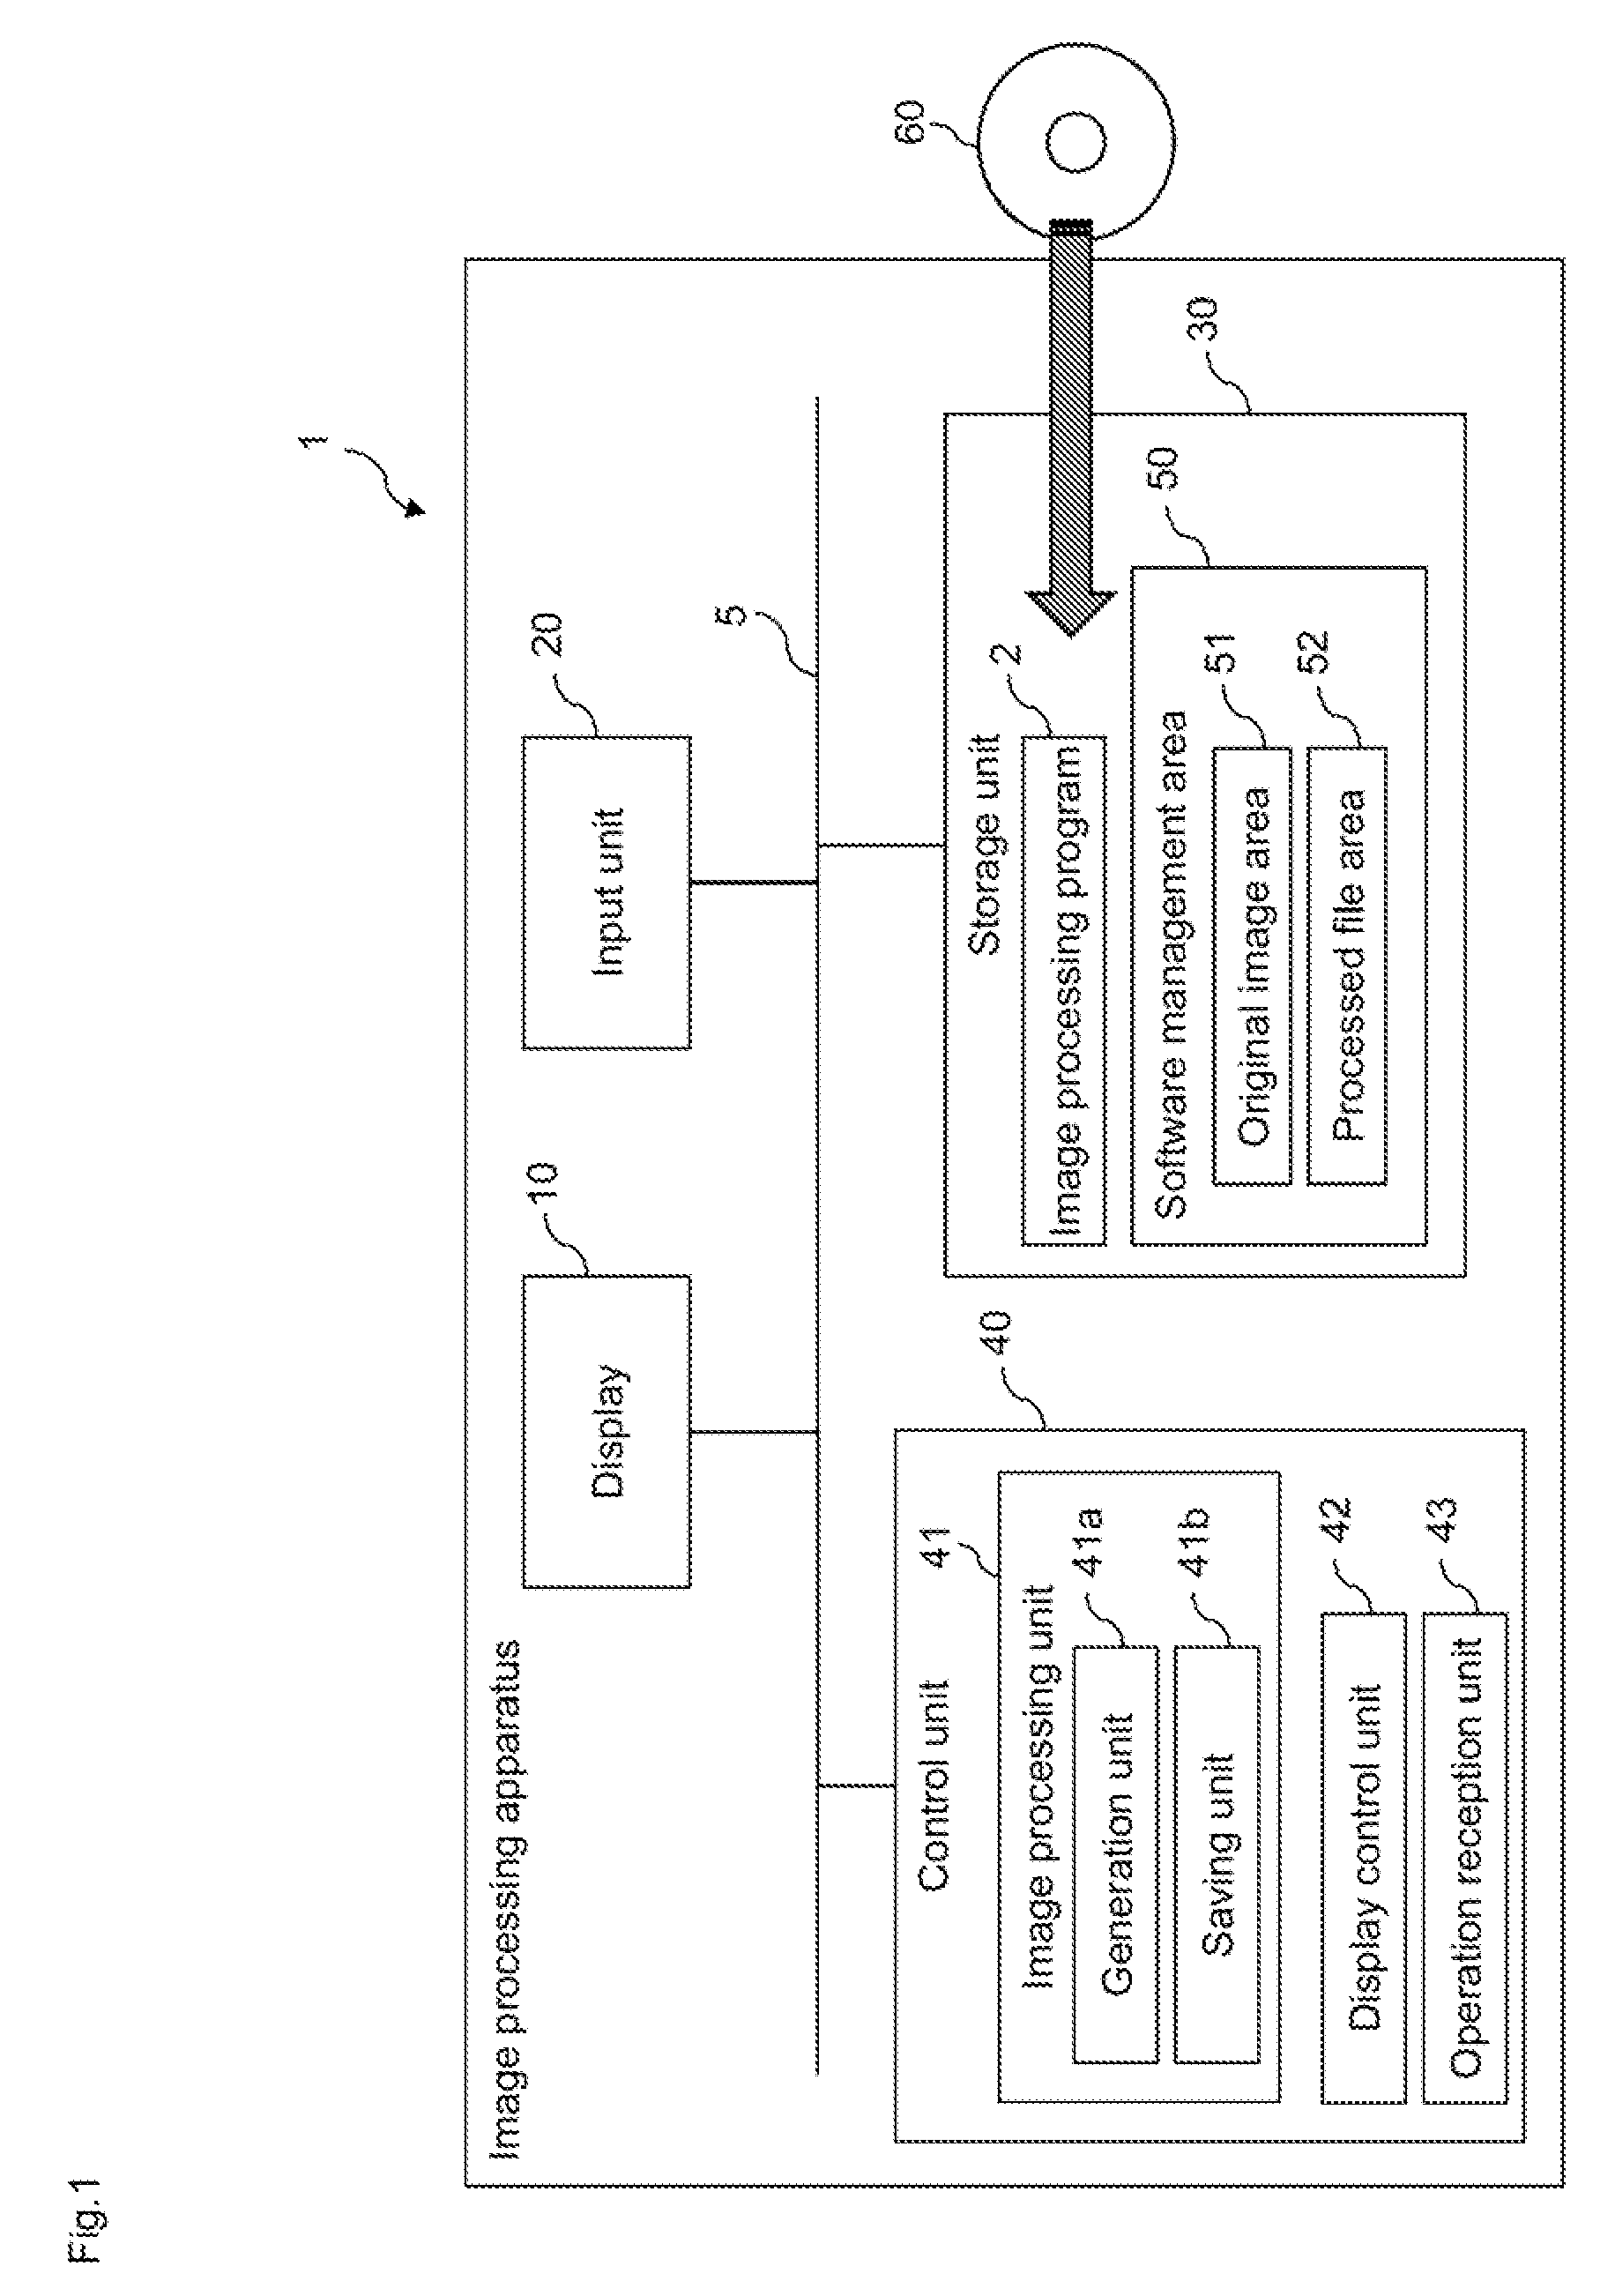 Image processing apparatus, computer-readable medium storing an image processing program, and image processing method